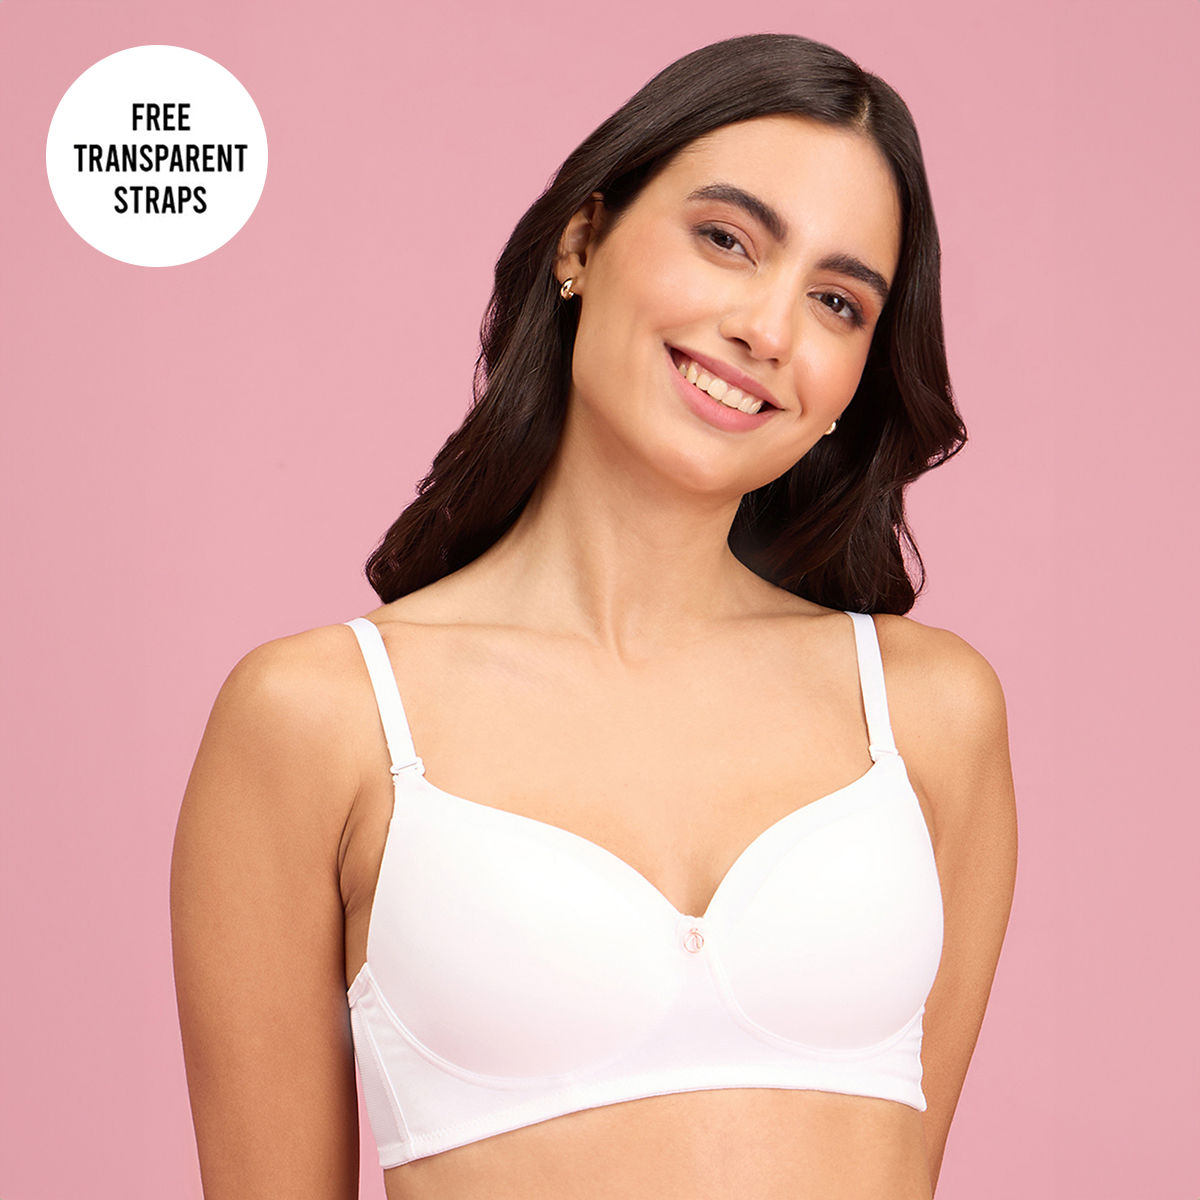 Nykd by Nykaa Iconic Low Back Party Bra - NYB252 - Black